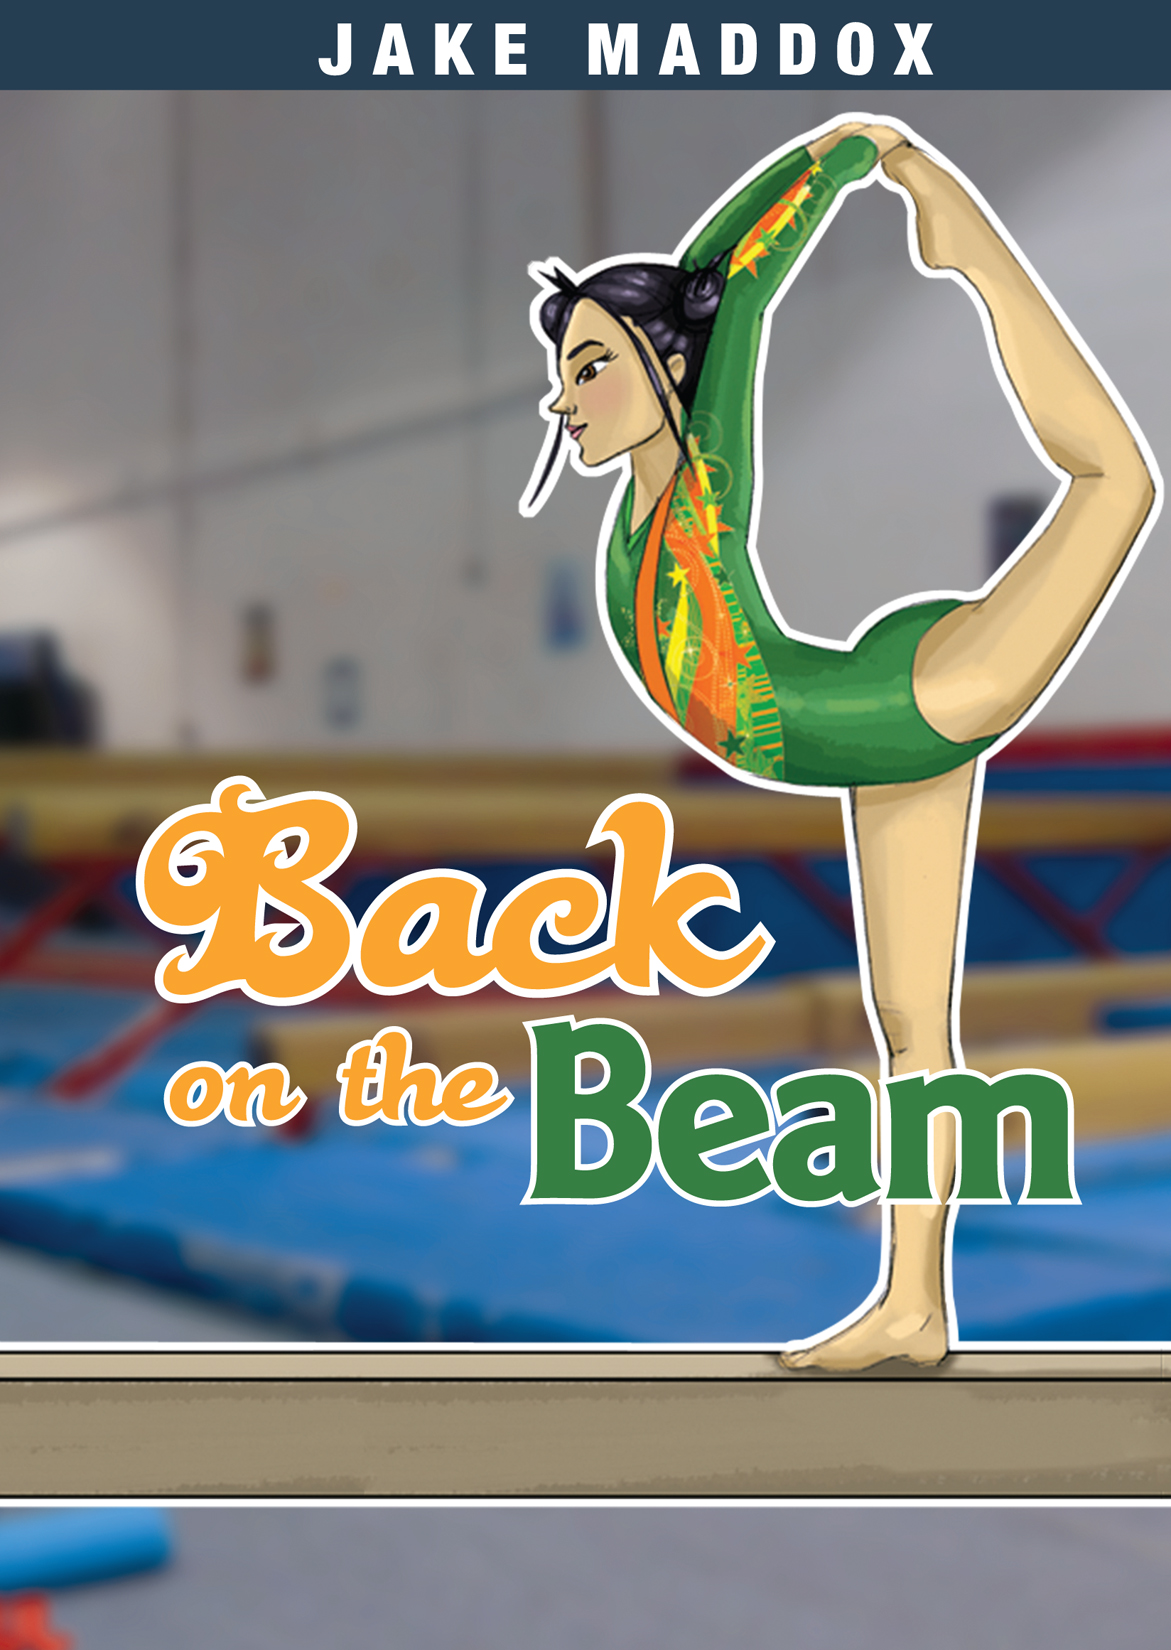 Back on the Beam (2009) by Jake Maddox